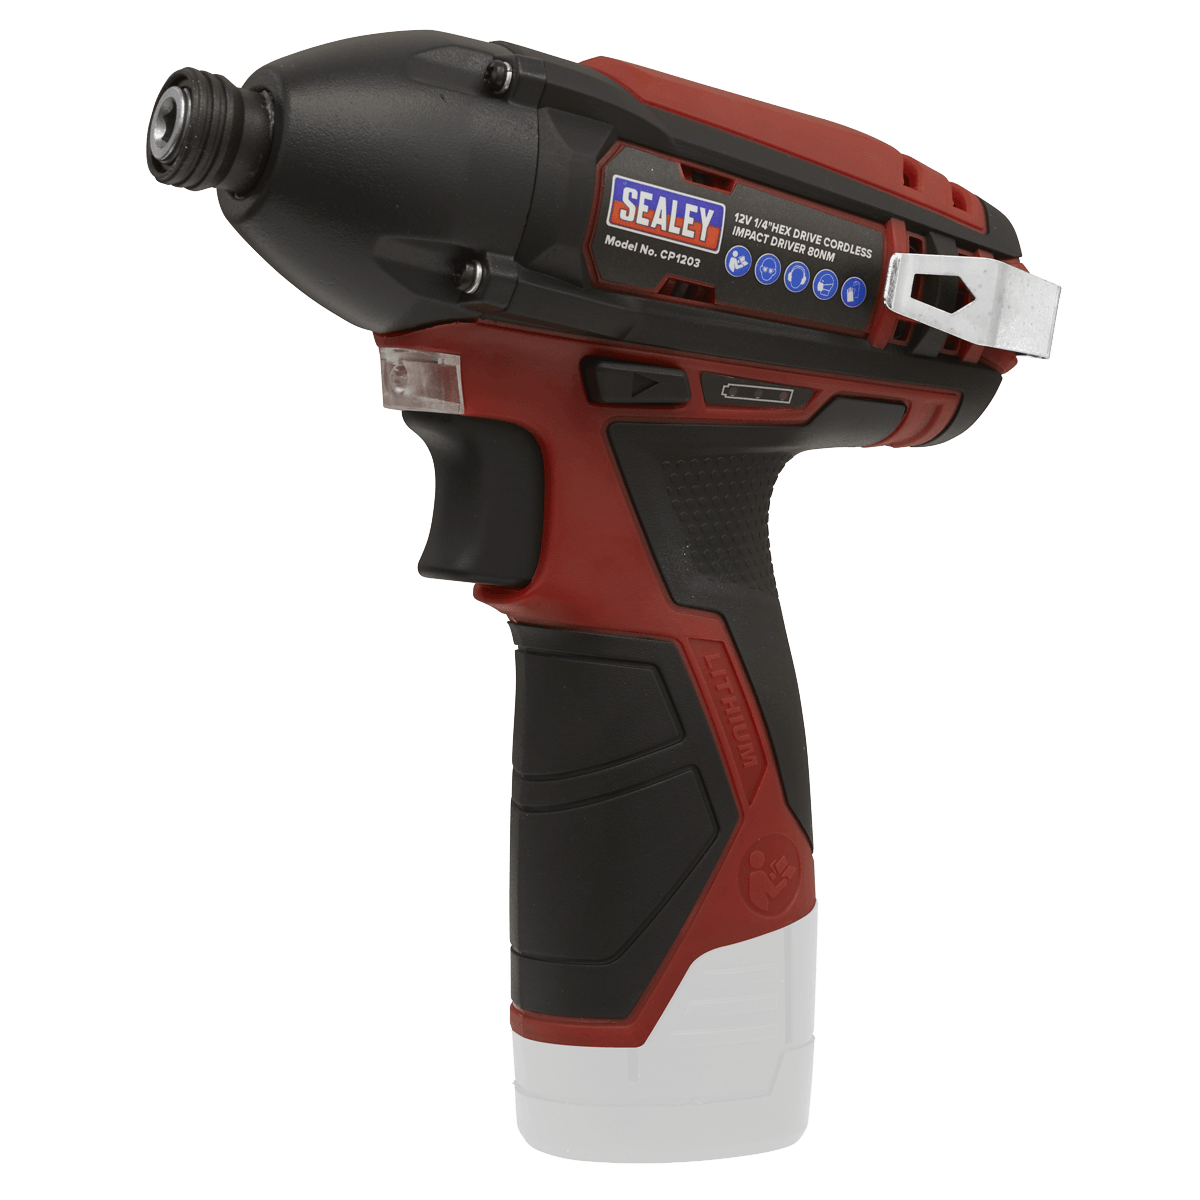 Sealey Cordless Impact Driver 1/4"Hex Drive 12V SV12 Series - Body Only CP1203 - Tools 2U Direct SW